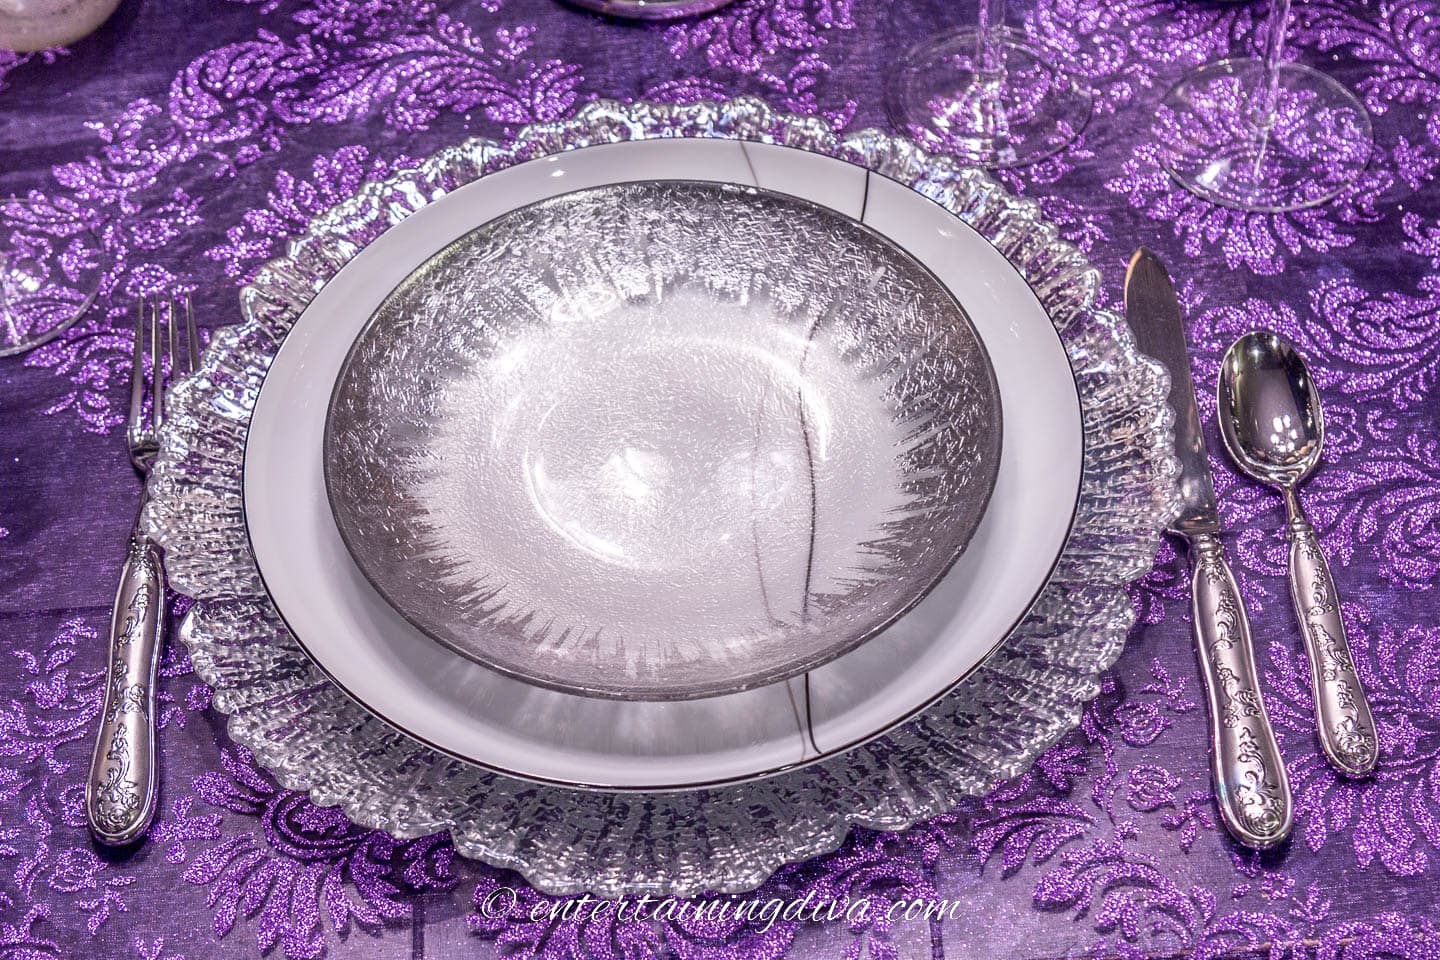 Place setting with a silver salad plate, black and white dinner plate and silver charger on a purple lace tablecloth